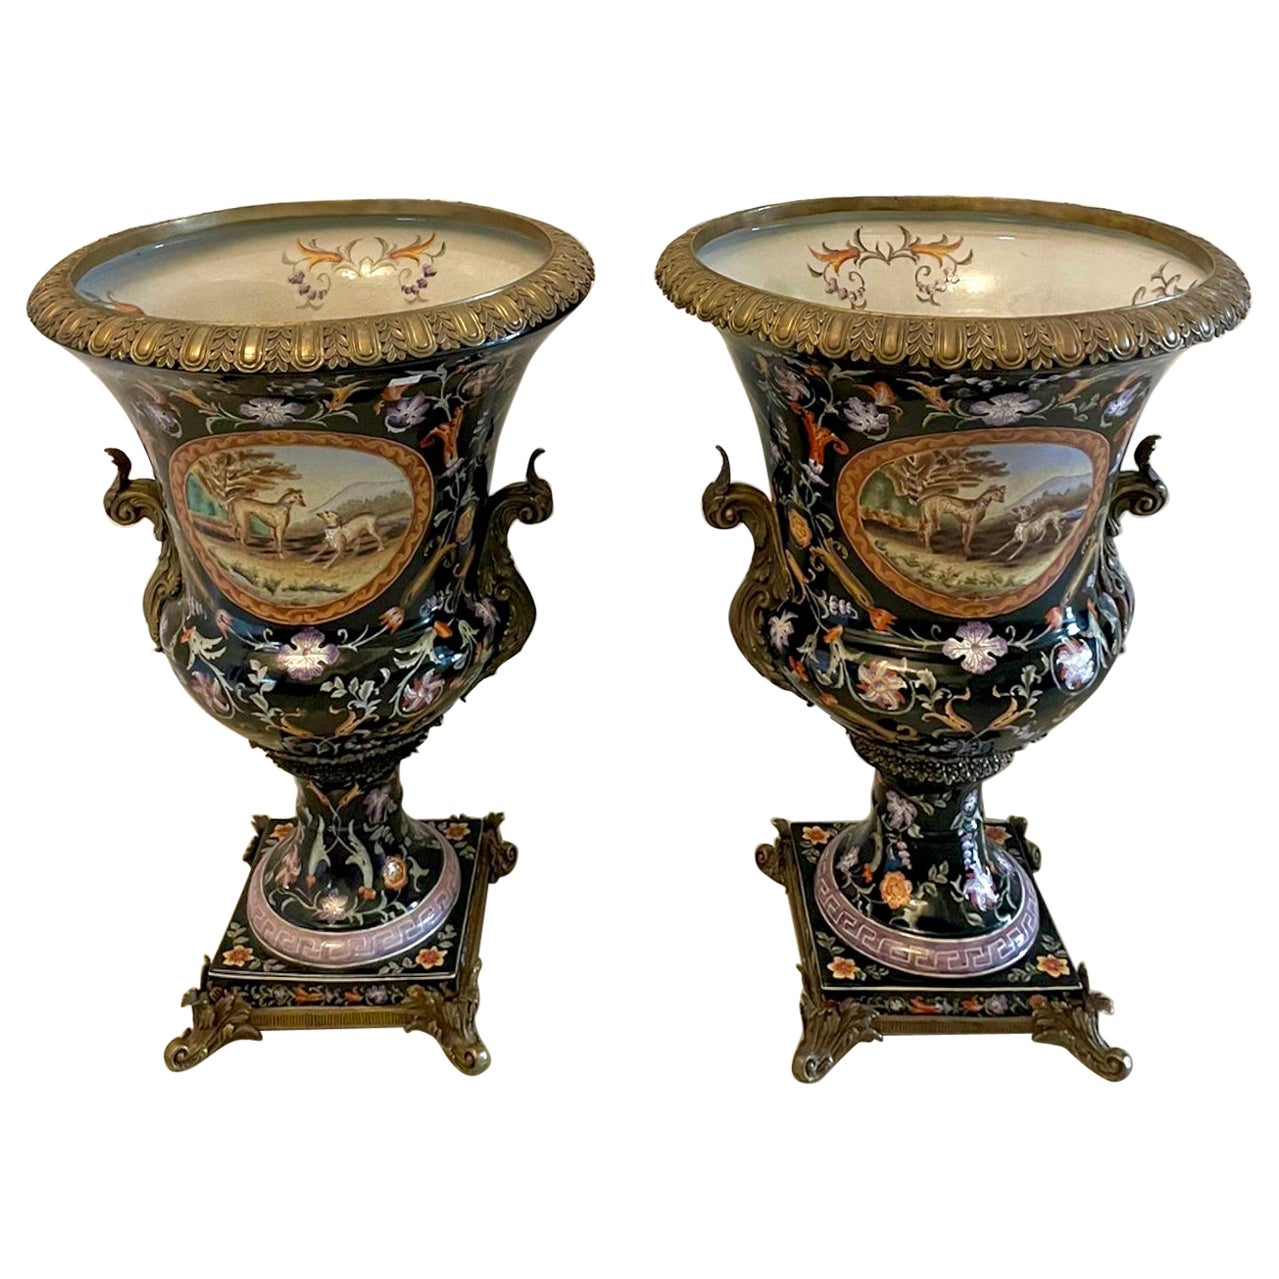 Large Pair of Quality Antique Porcelain and Ornate Brass Mounted Vases